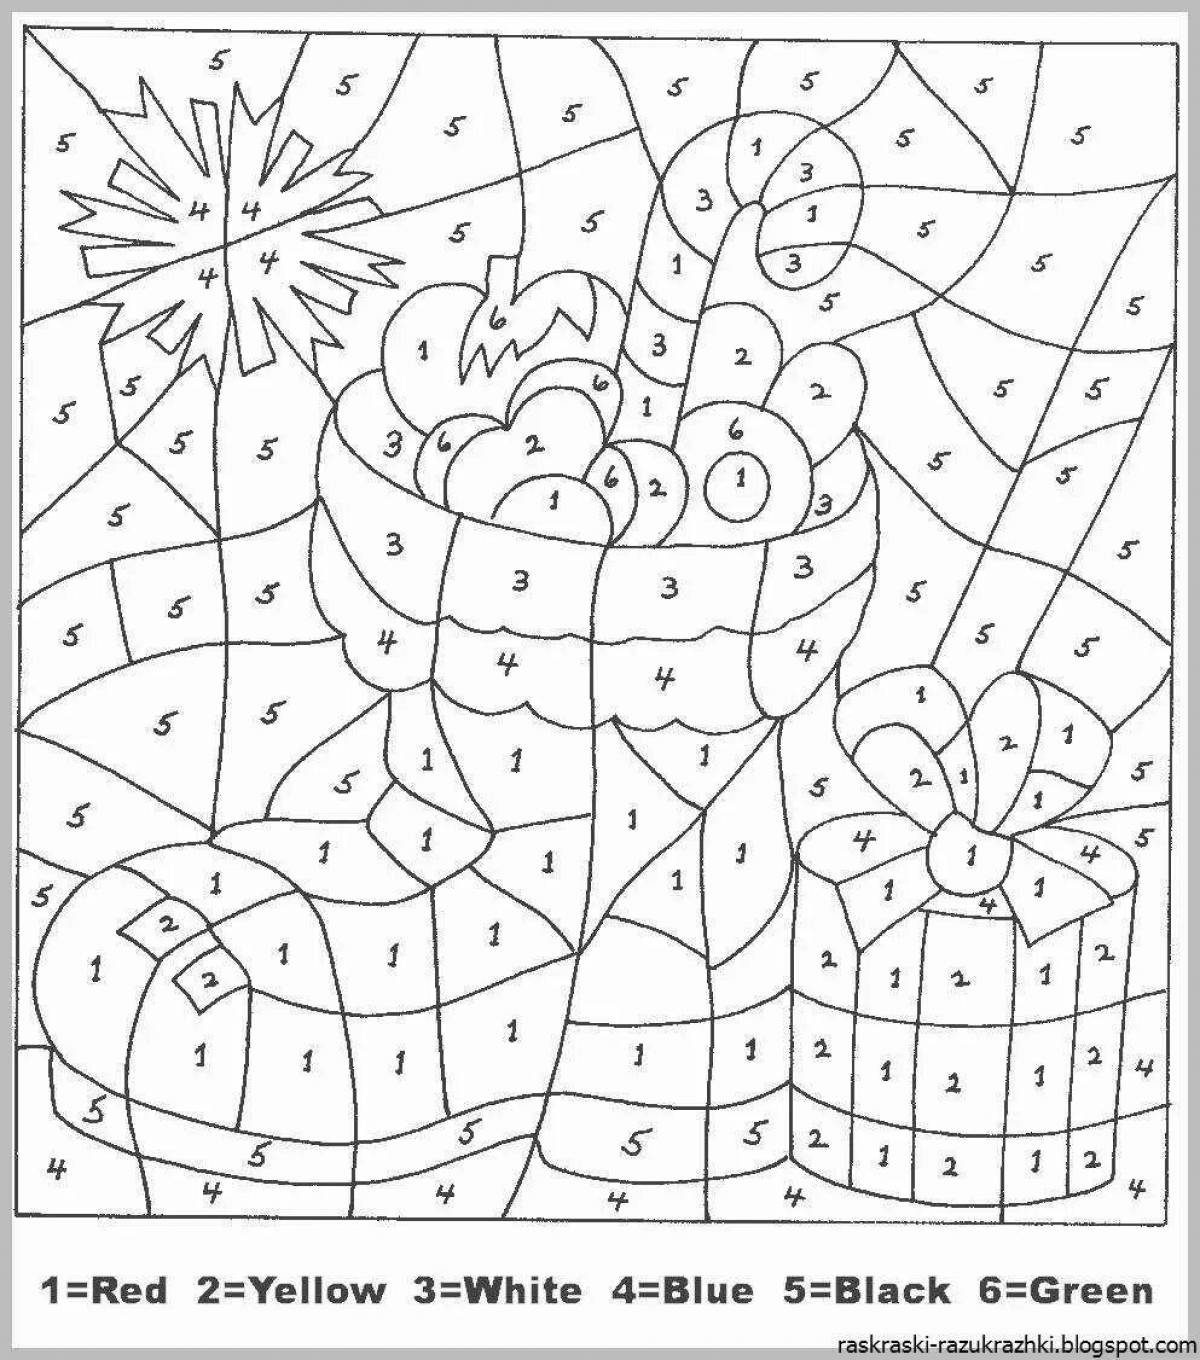 Joyful coloring by numbers for girls 8 years old